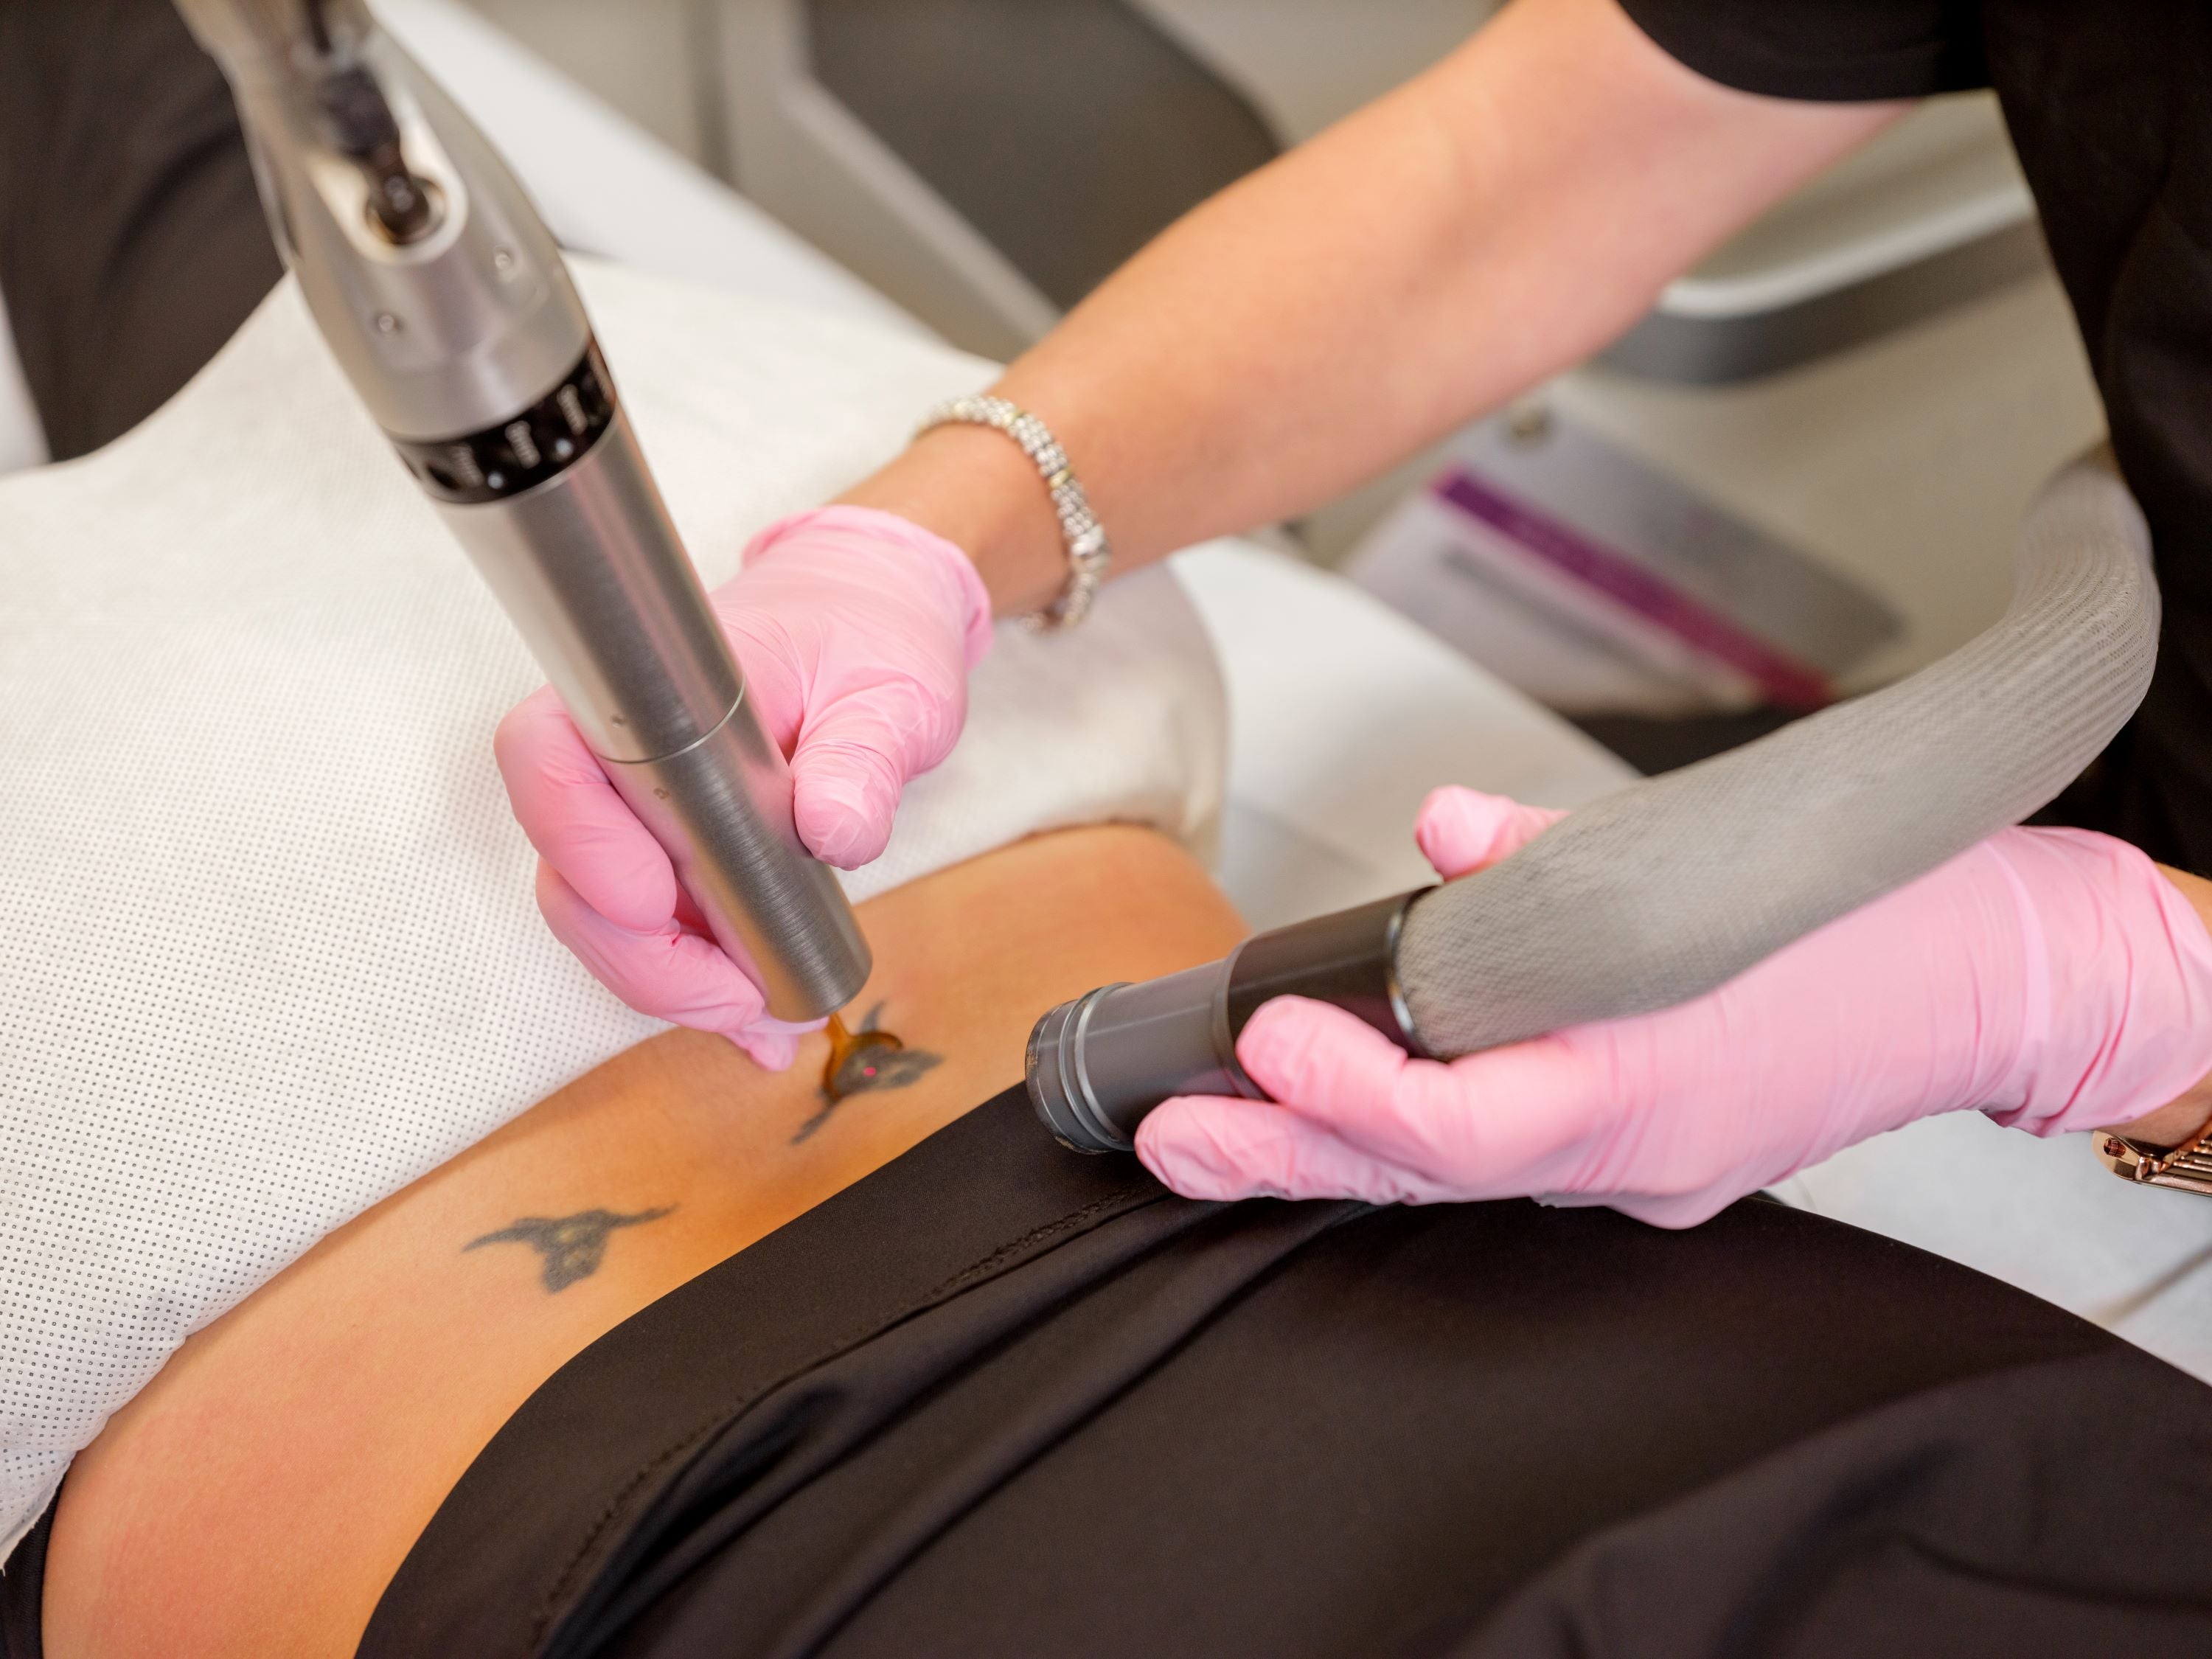 Picosure laser tattoo removal $197 Flat Fee 6